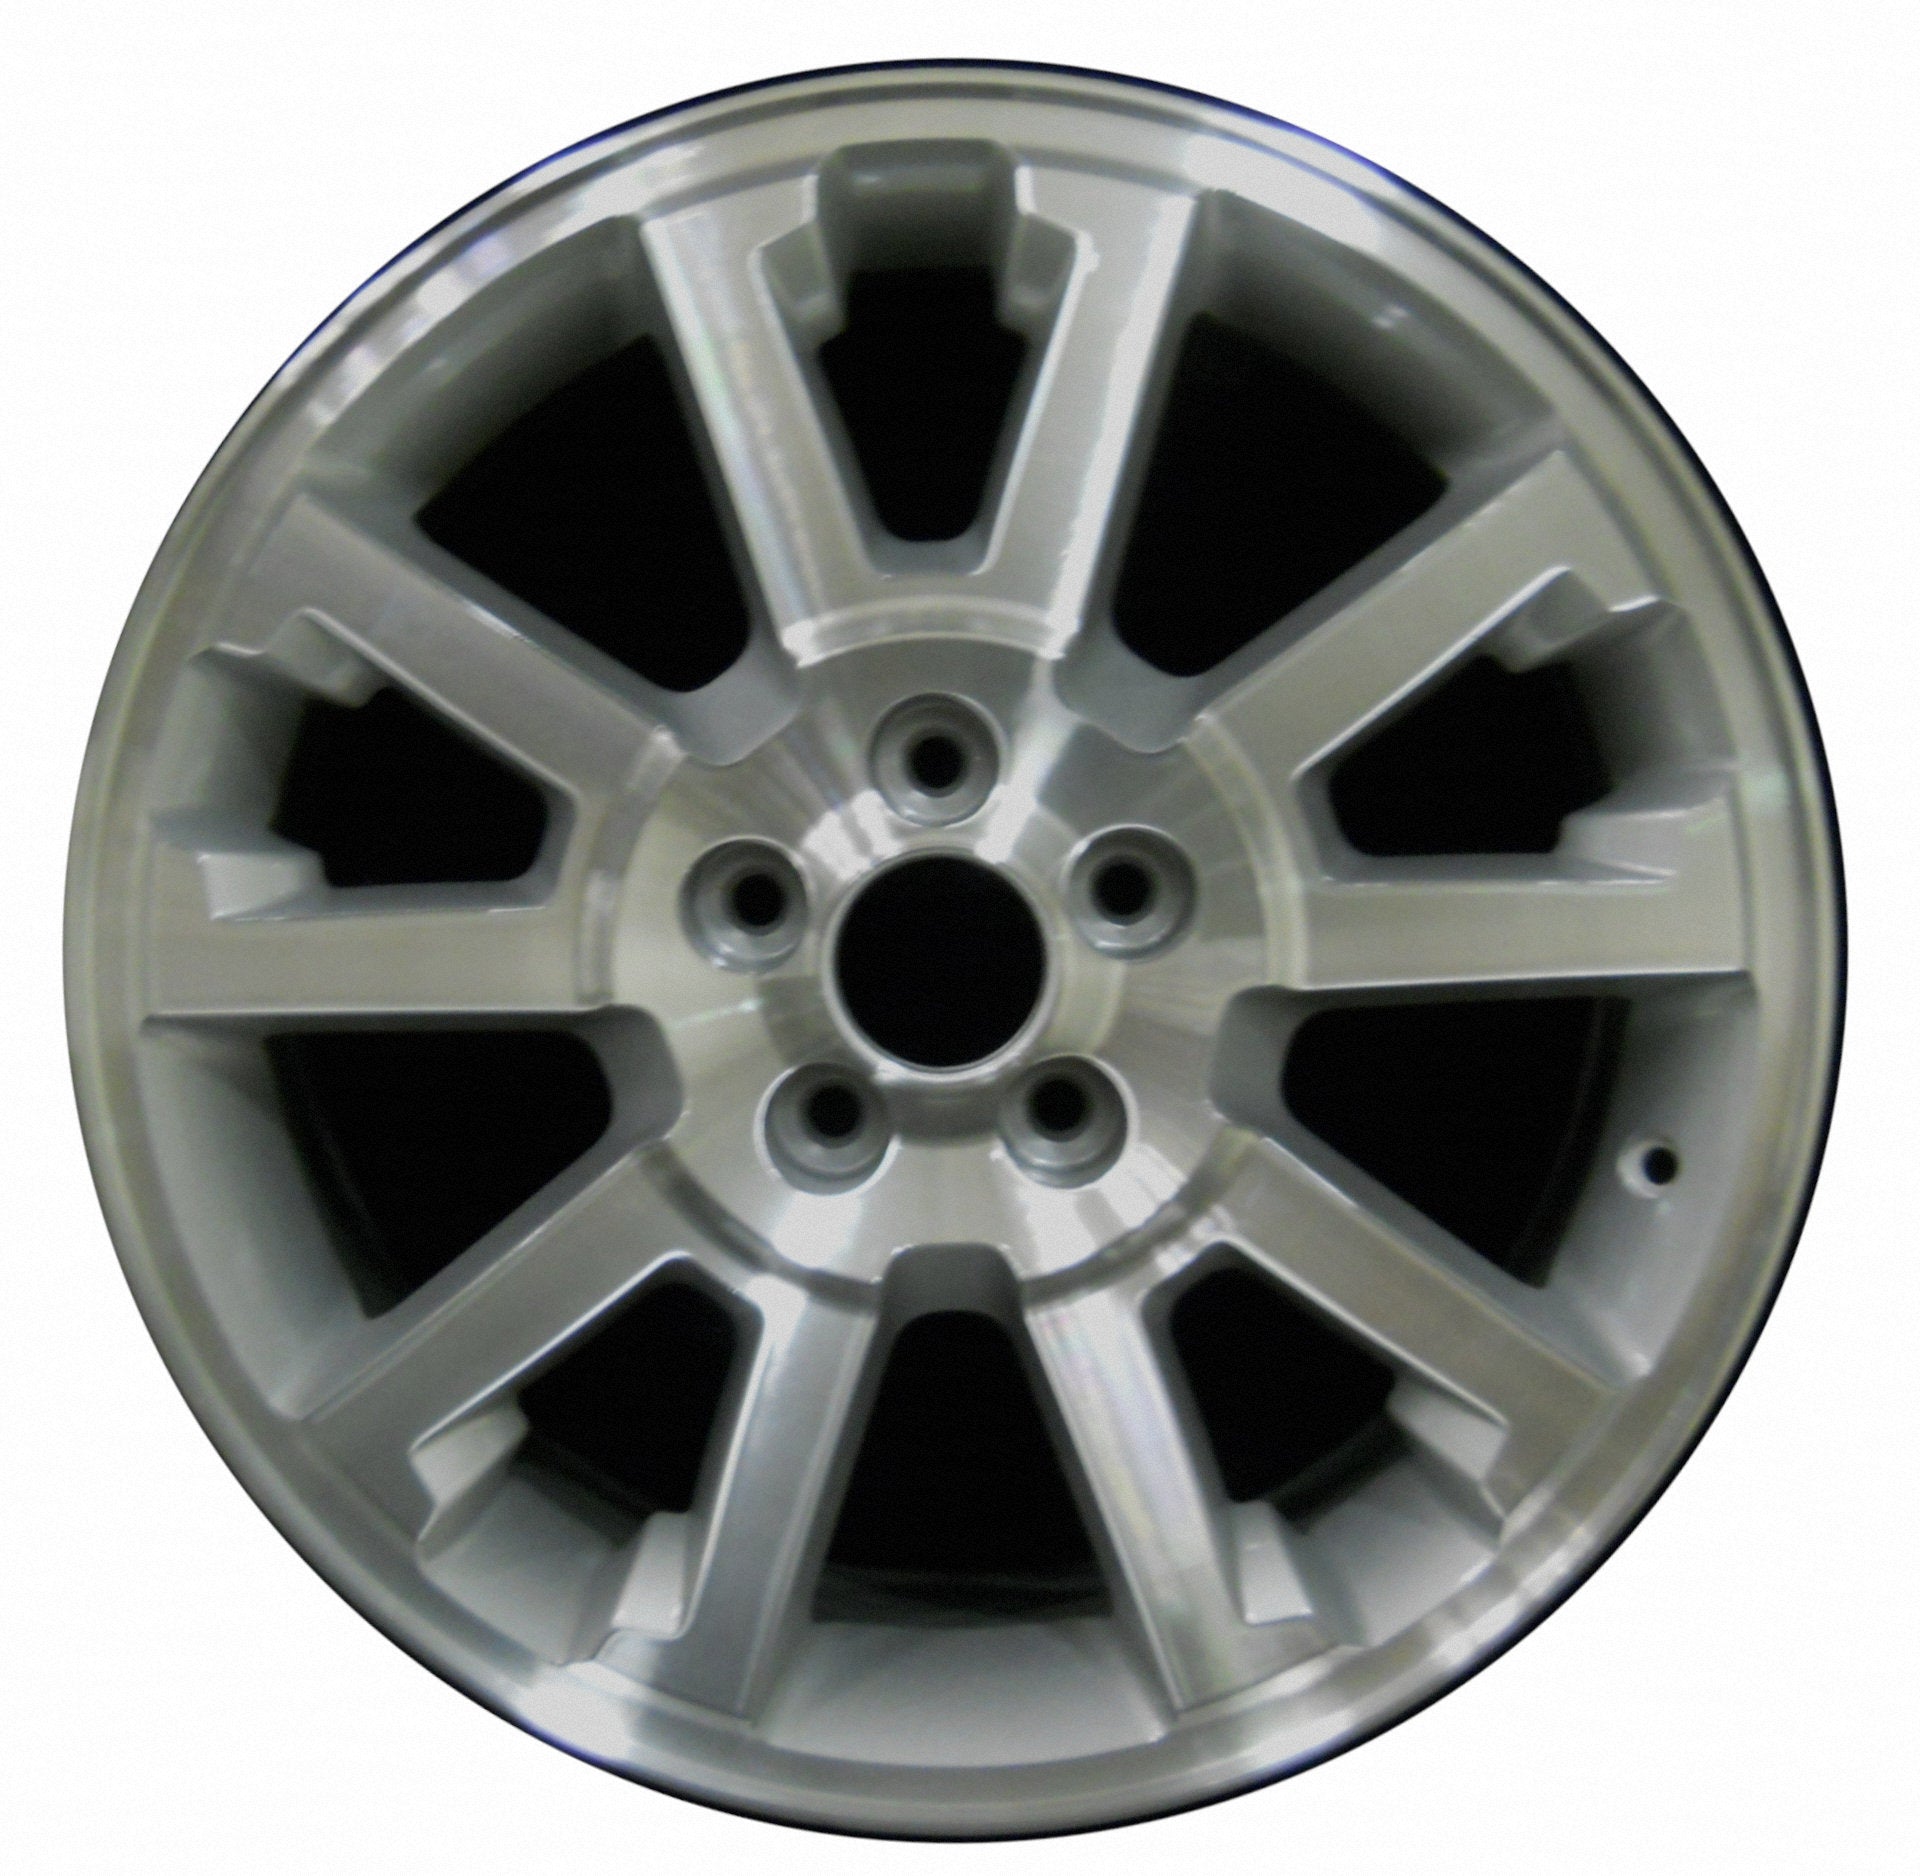 Ford Explorer  2007, 2008, 2009, 2010 Factory OEM Car Wheel Size 18x7.5 Alloy WAO.3653.PS02.MA